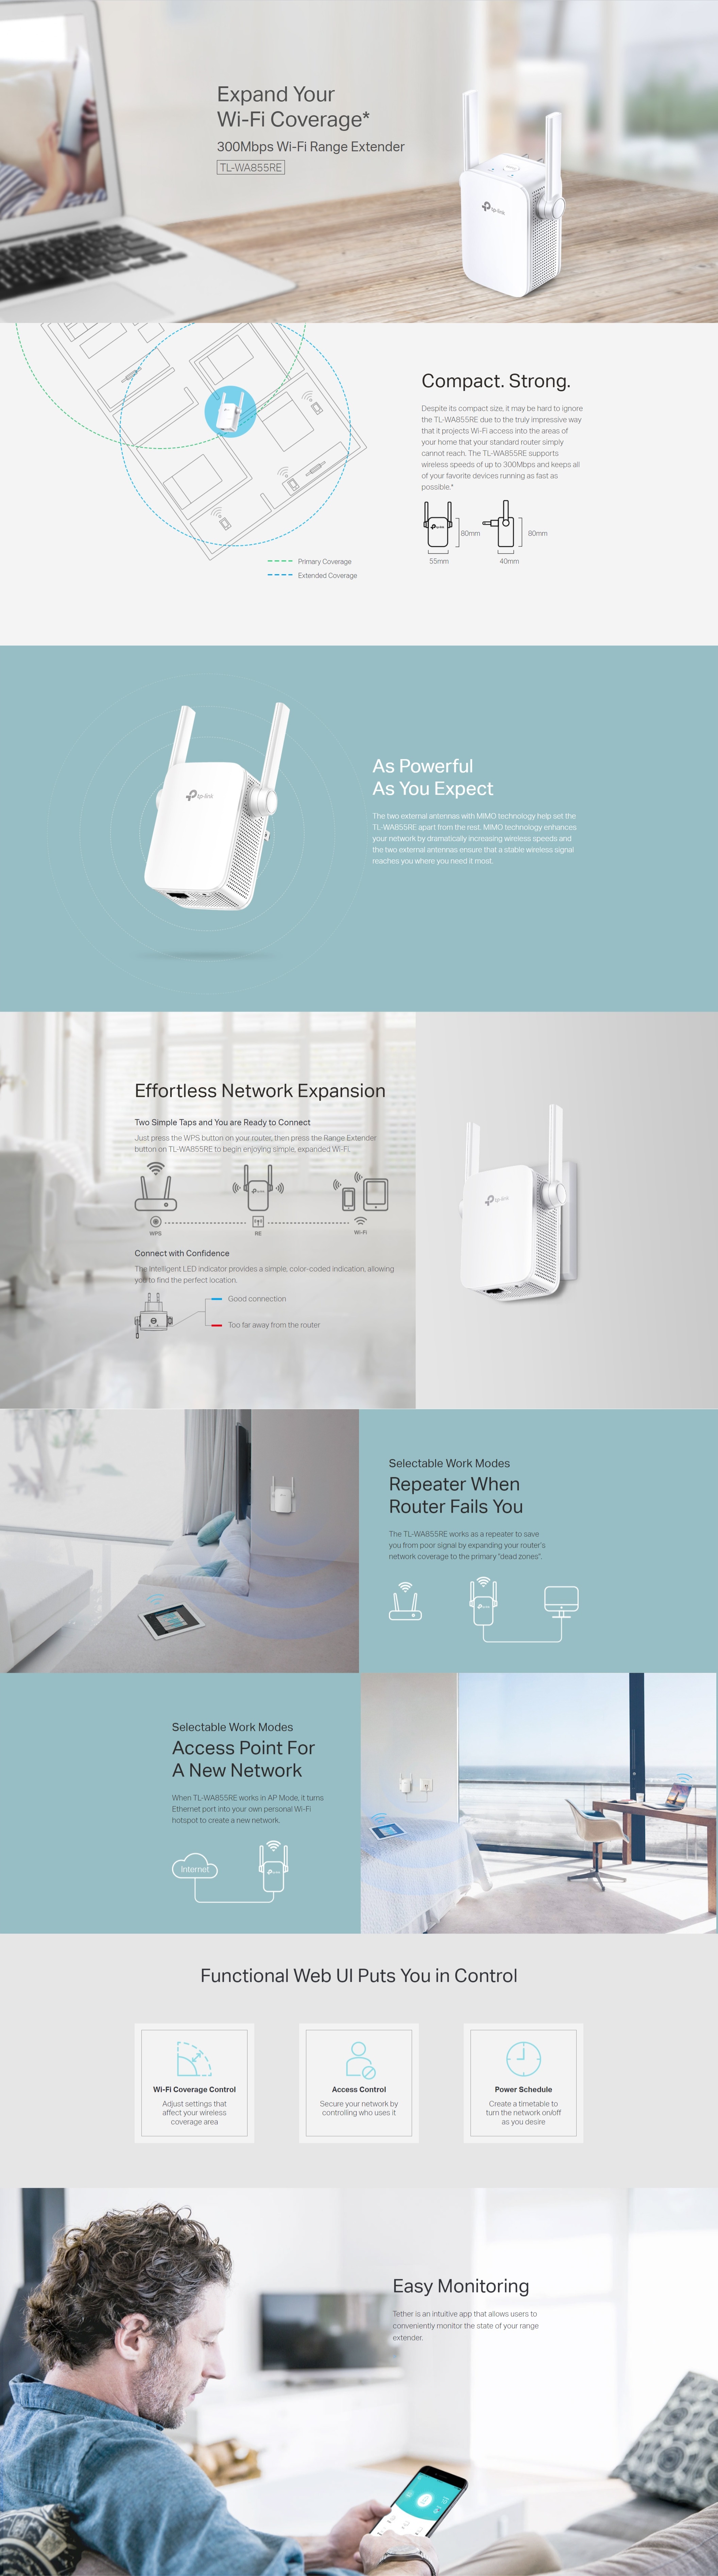 A large marketing image providing additional information about the product TP-Link WA855RE 300Mbps Wi-Fi Range Extender - Additional alt info not provided